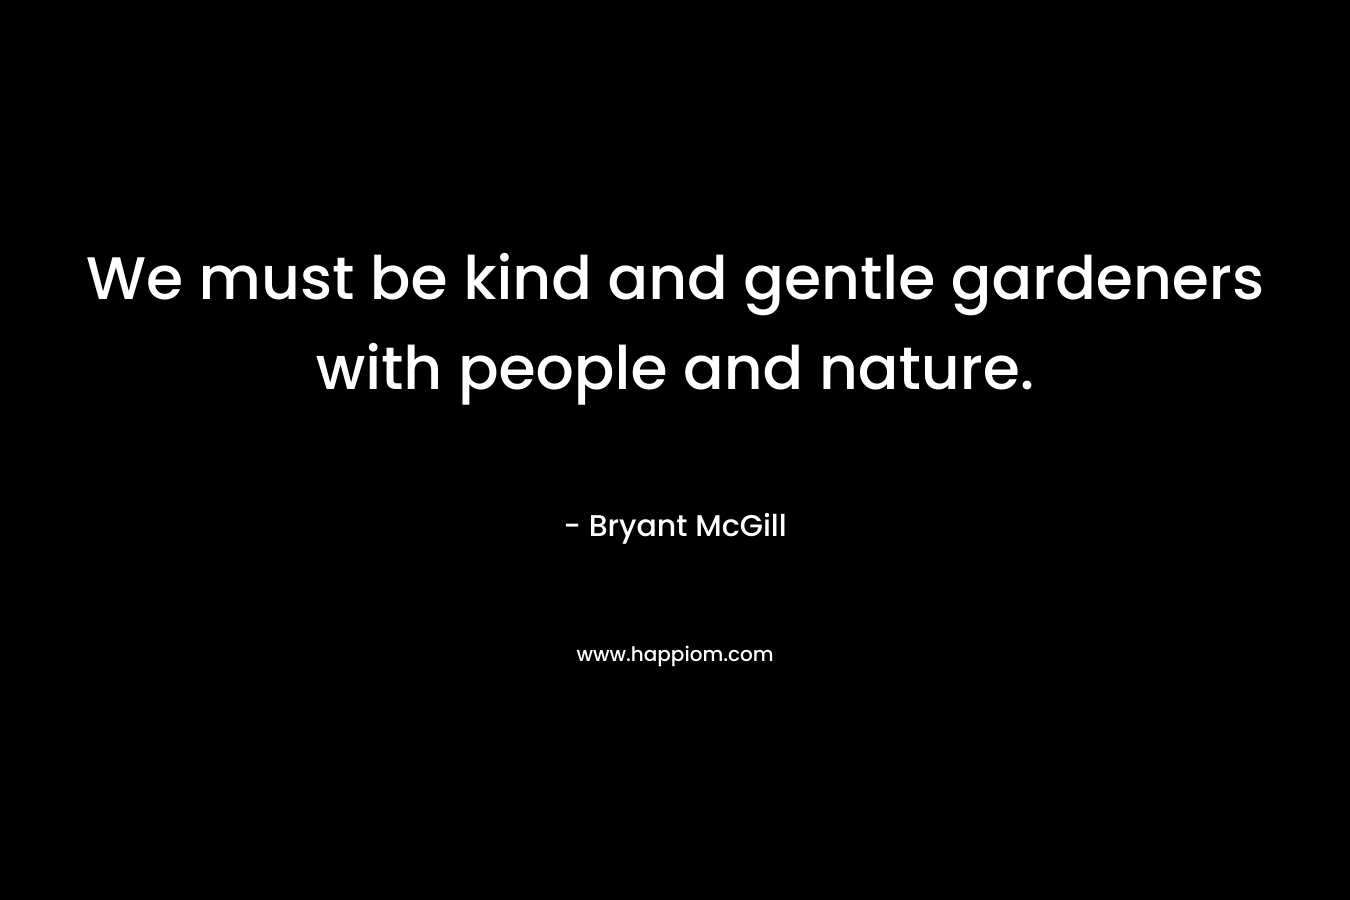 We must be kind and gentle gardeners with people and nature.